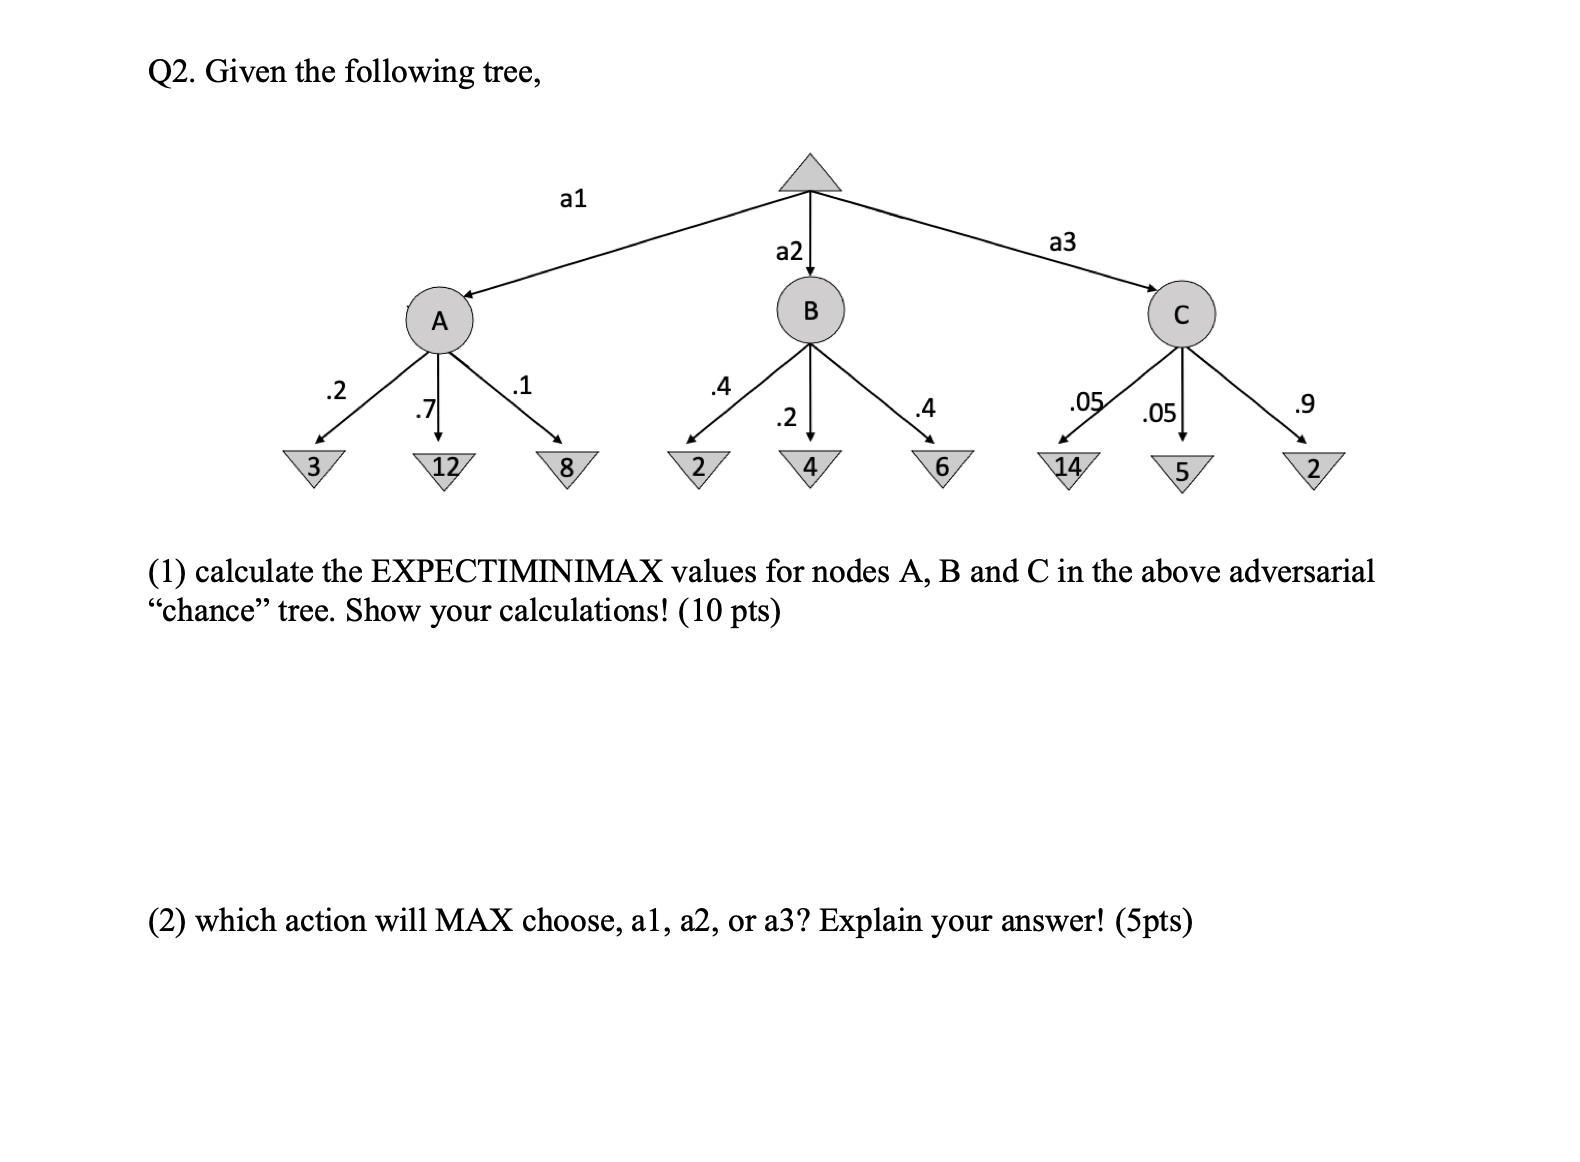 Q2. Given the following tree, .2 .1 al 8 .4 a2 .2 B 4 6 a3 .05 14/ .05 5 .9 (1) calculate the EXPECTIMINIMAX